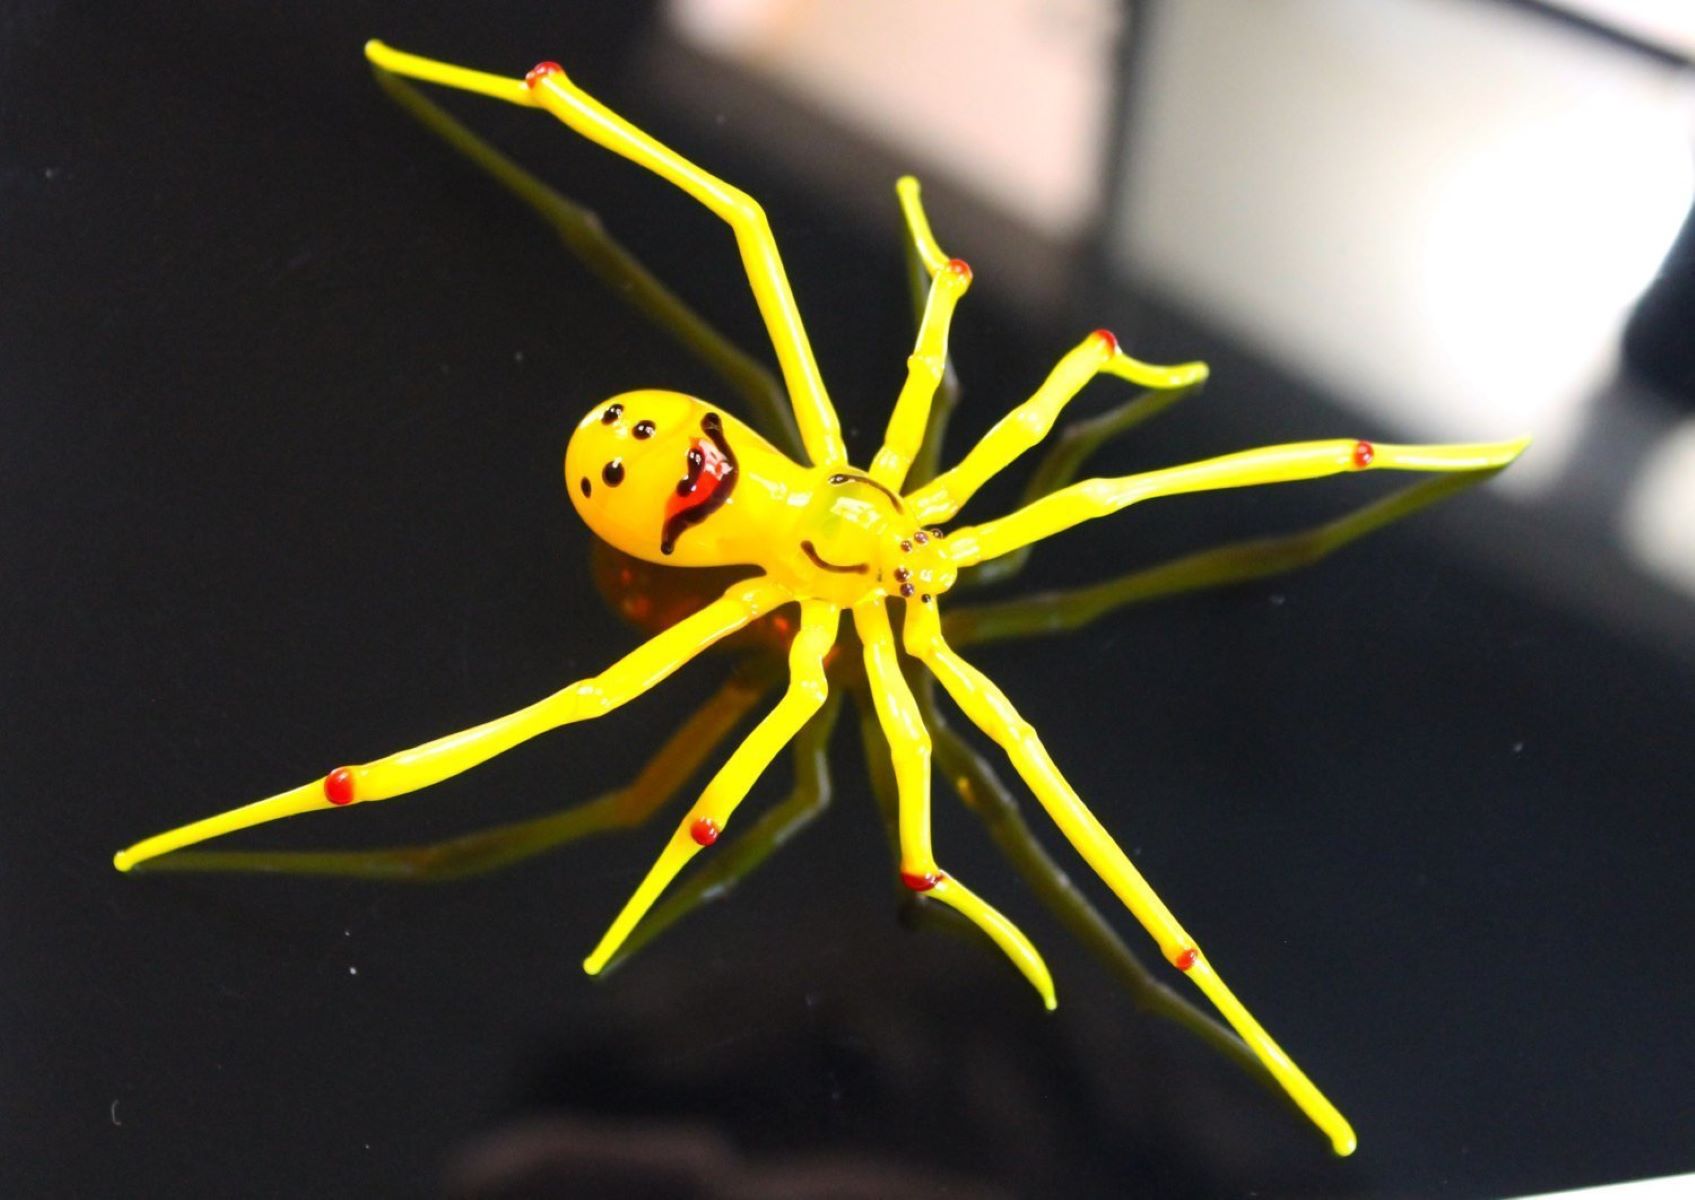 17-captivating-facts-about-smiley-face-spider